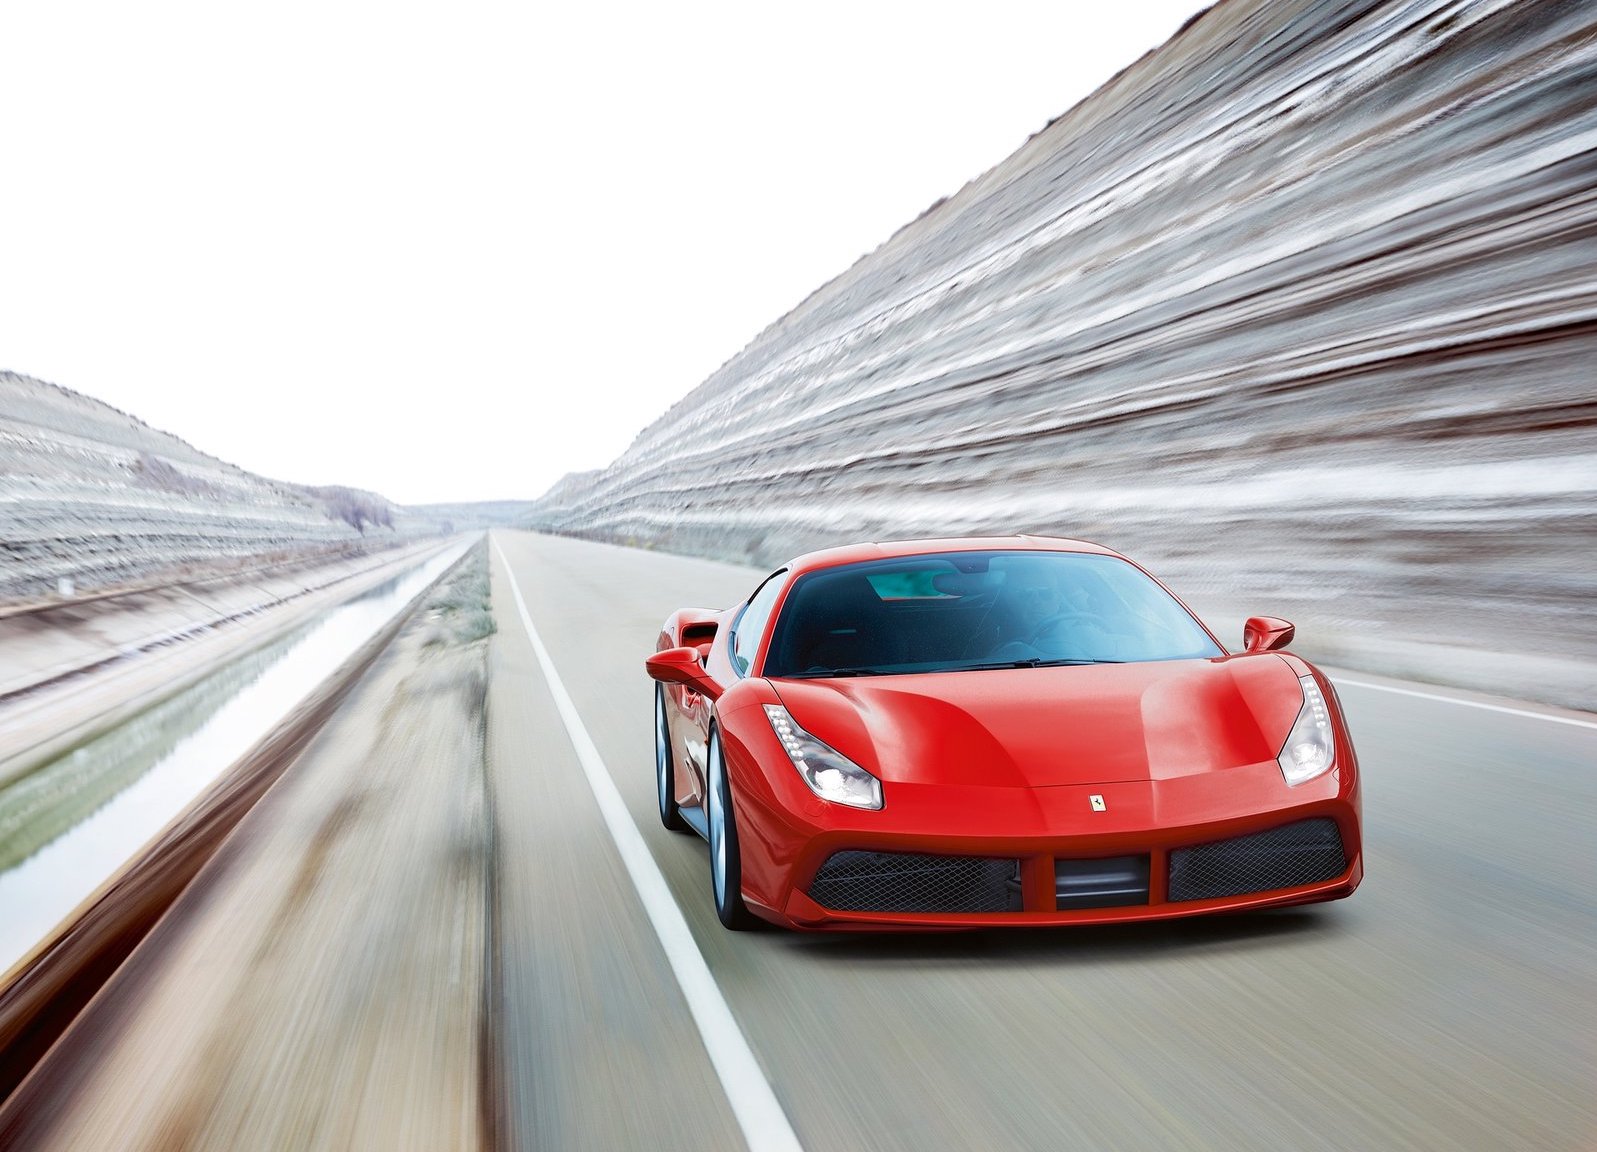 An image of a red Ferrari 488 GTB on a race track.